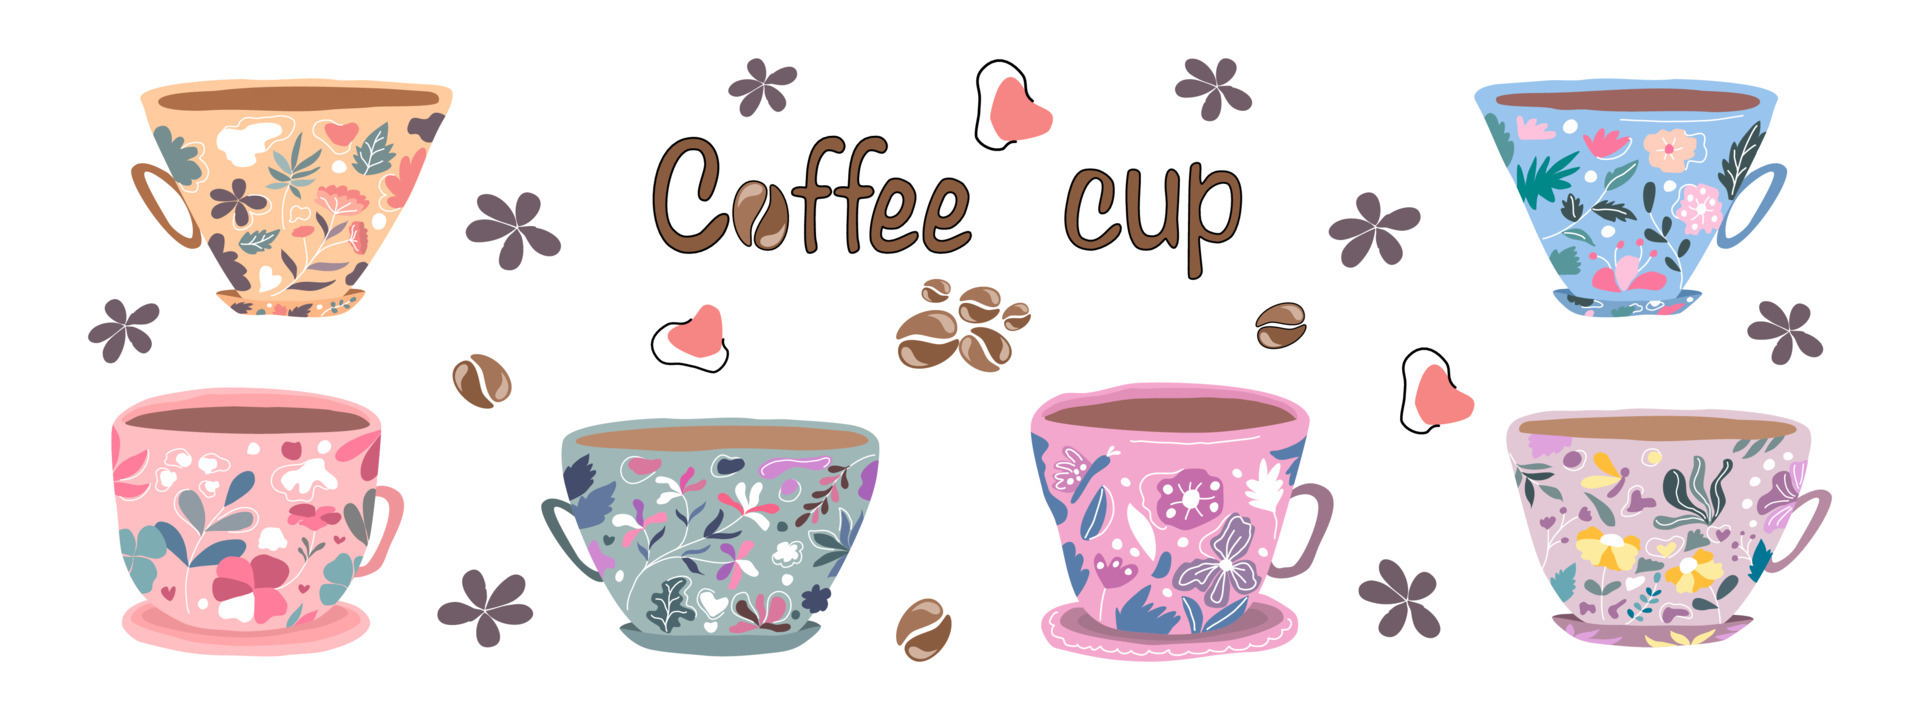 Cute vintage coffee cup set Designed in doodle style for digital ...